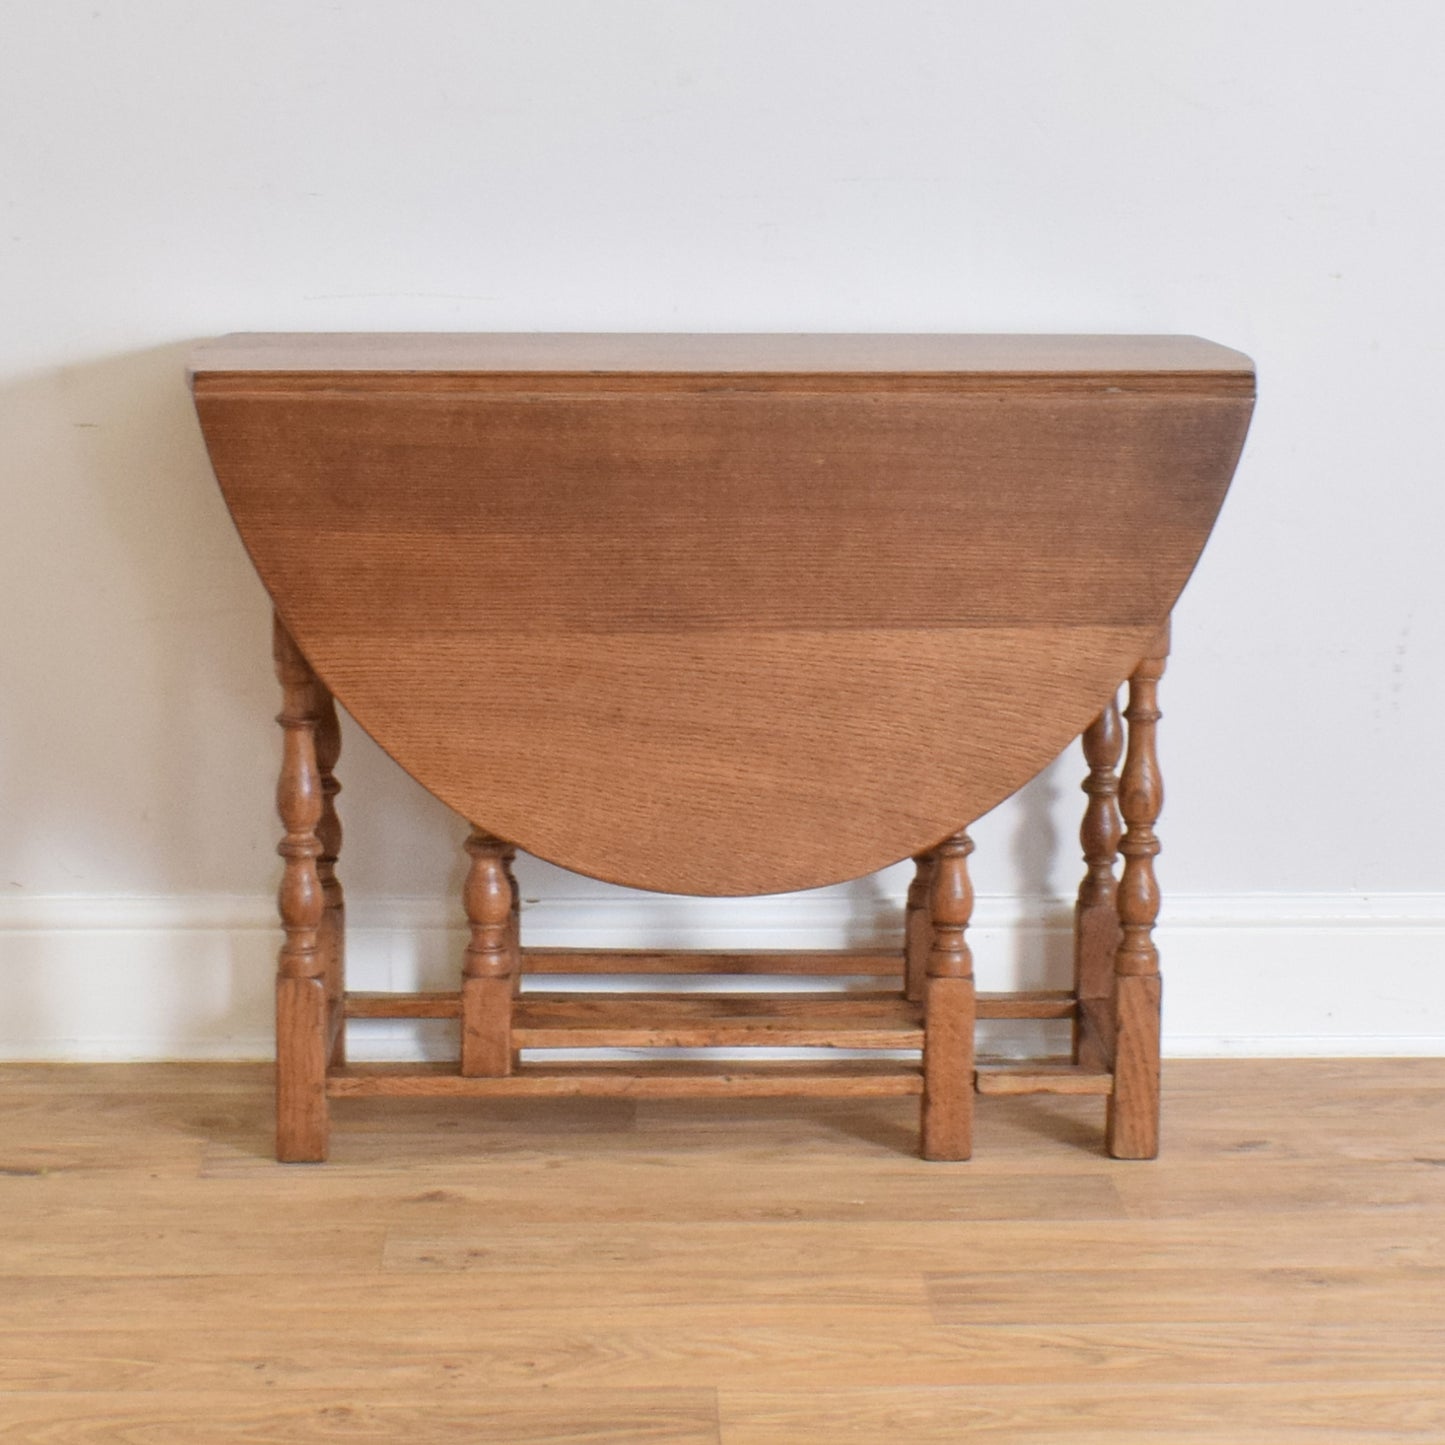 Drop Leaf Table And Four Chairs